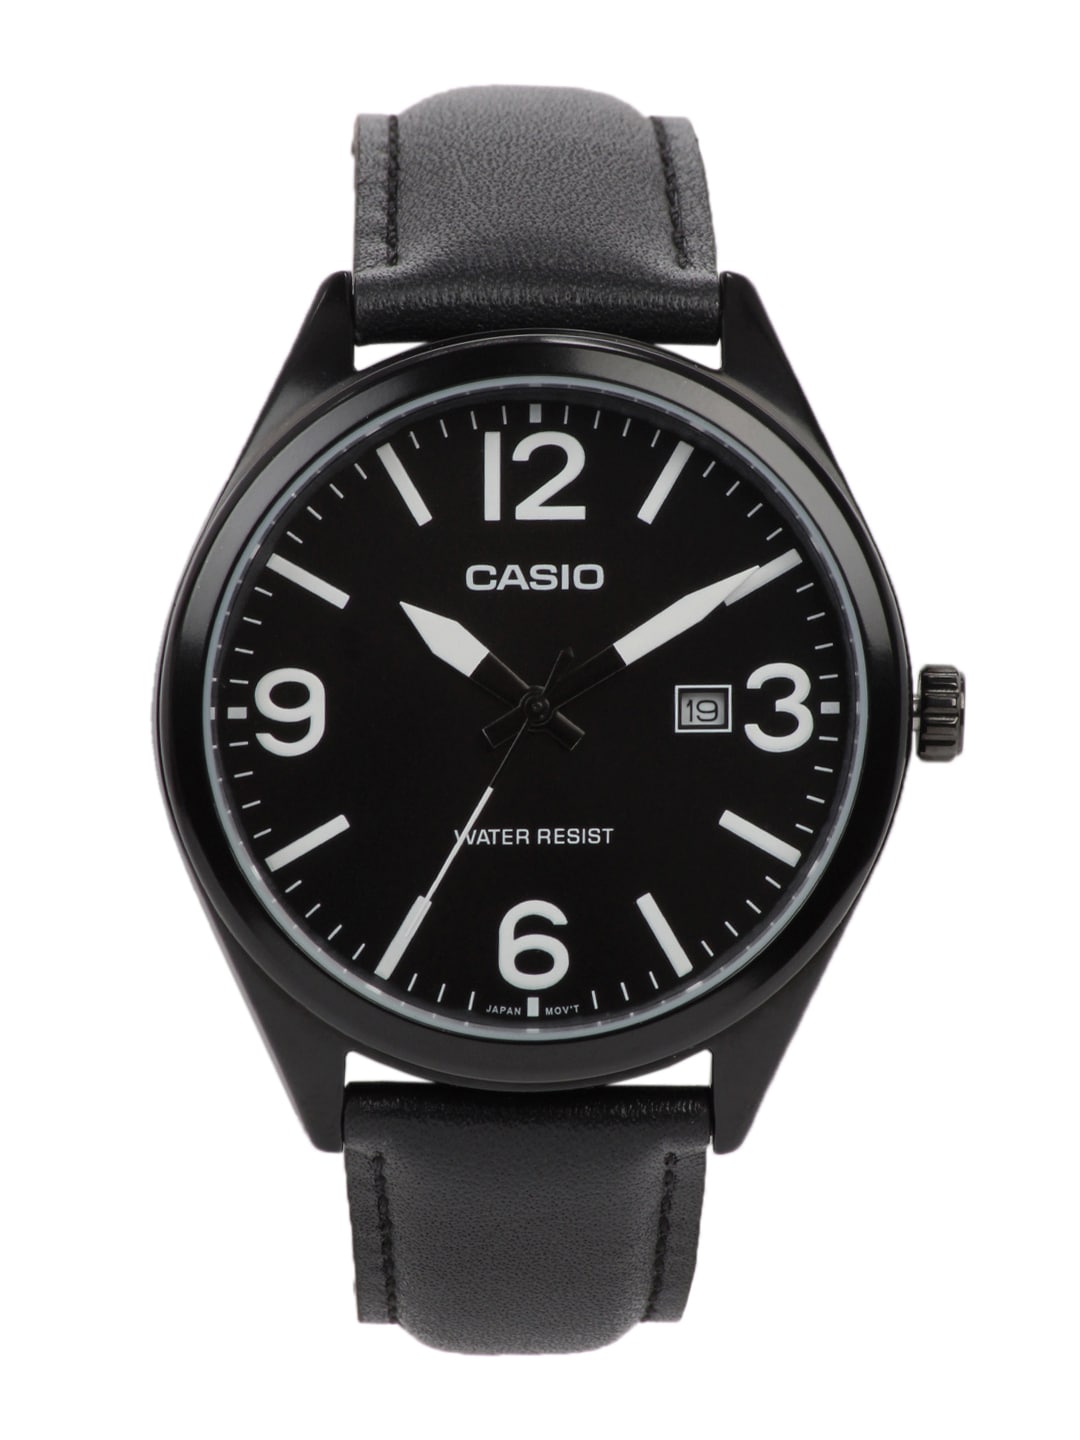 CASIO ENTICER Men Black Dial Analogue Watch A627